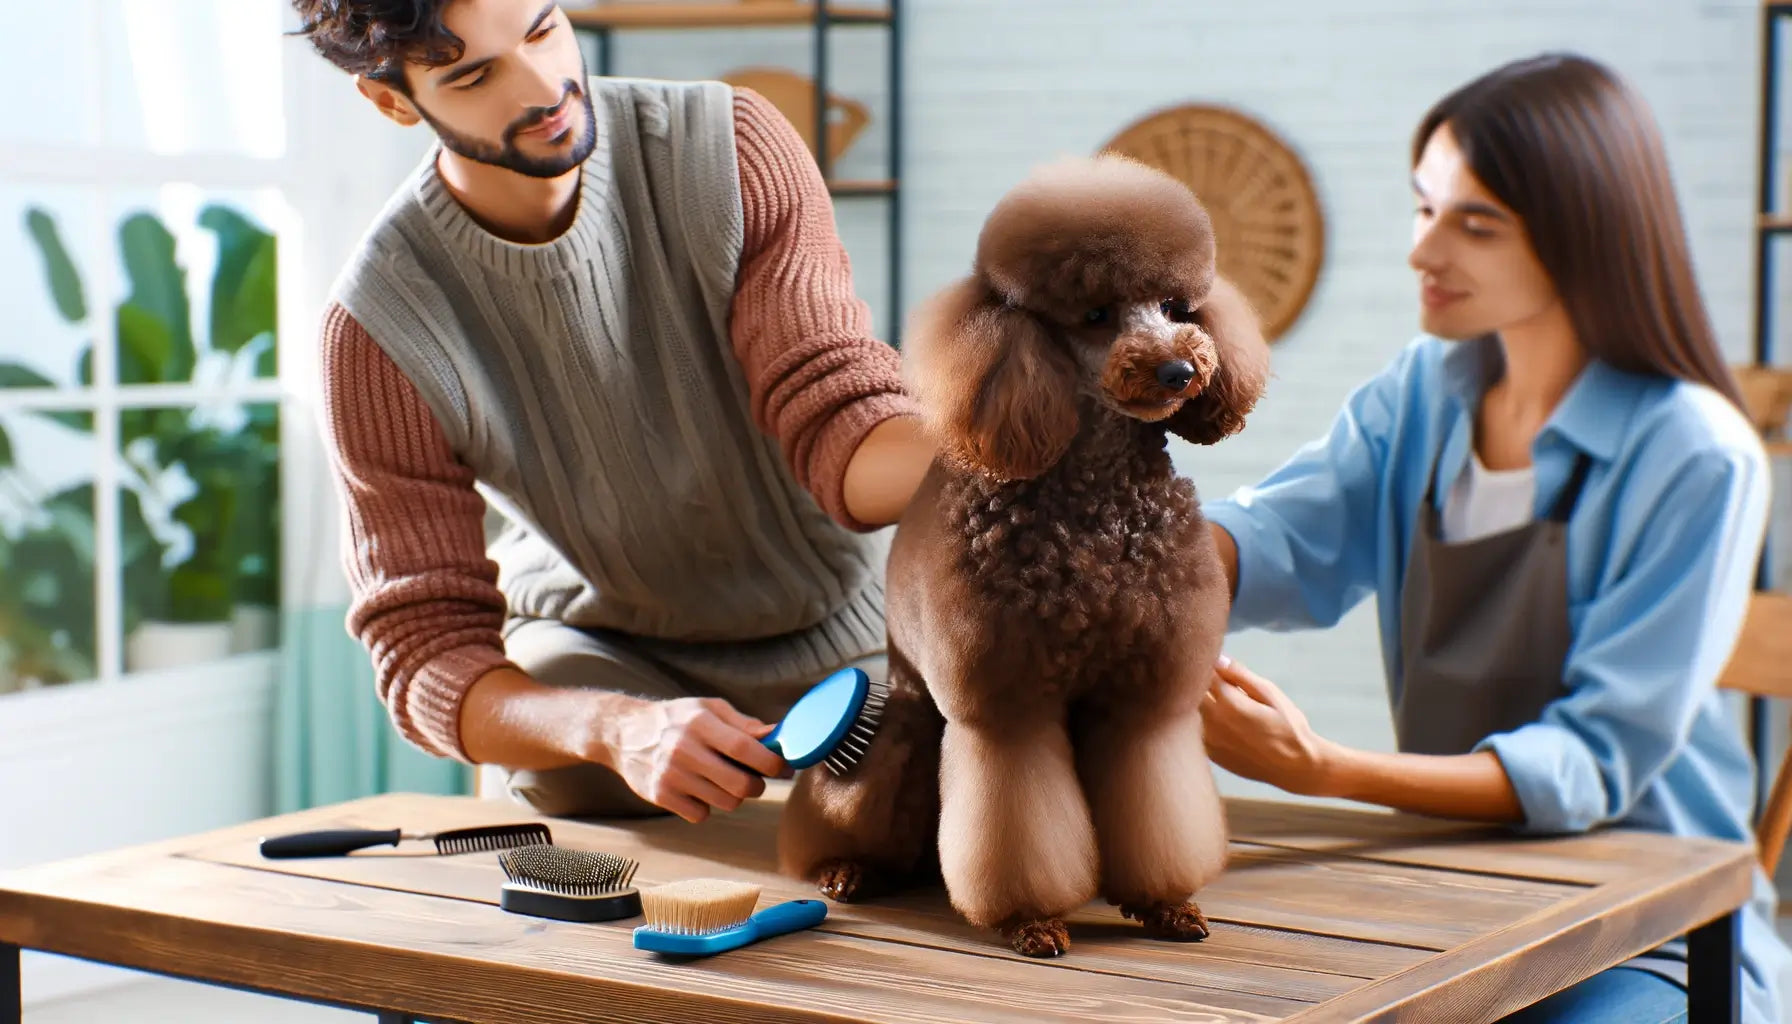 A brown Poodle being groomed by its owner in a domestic setting.